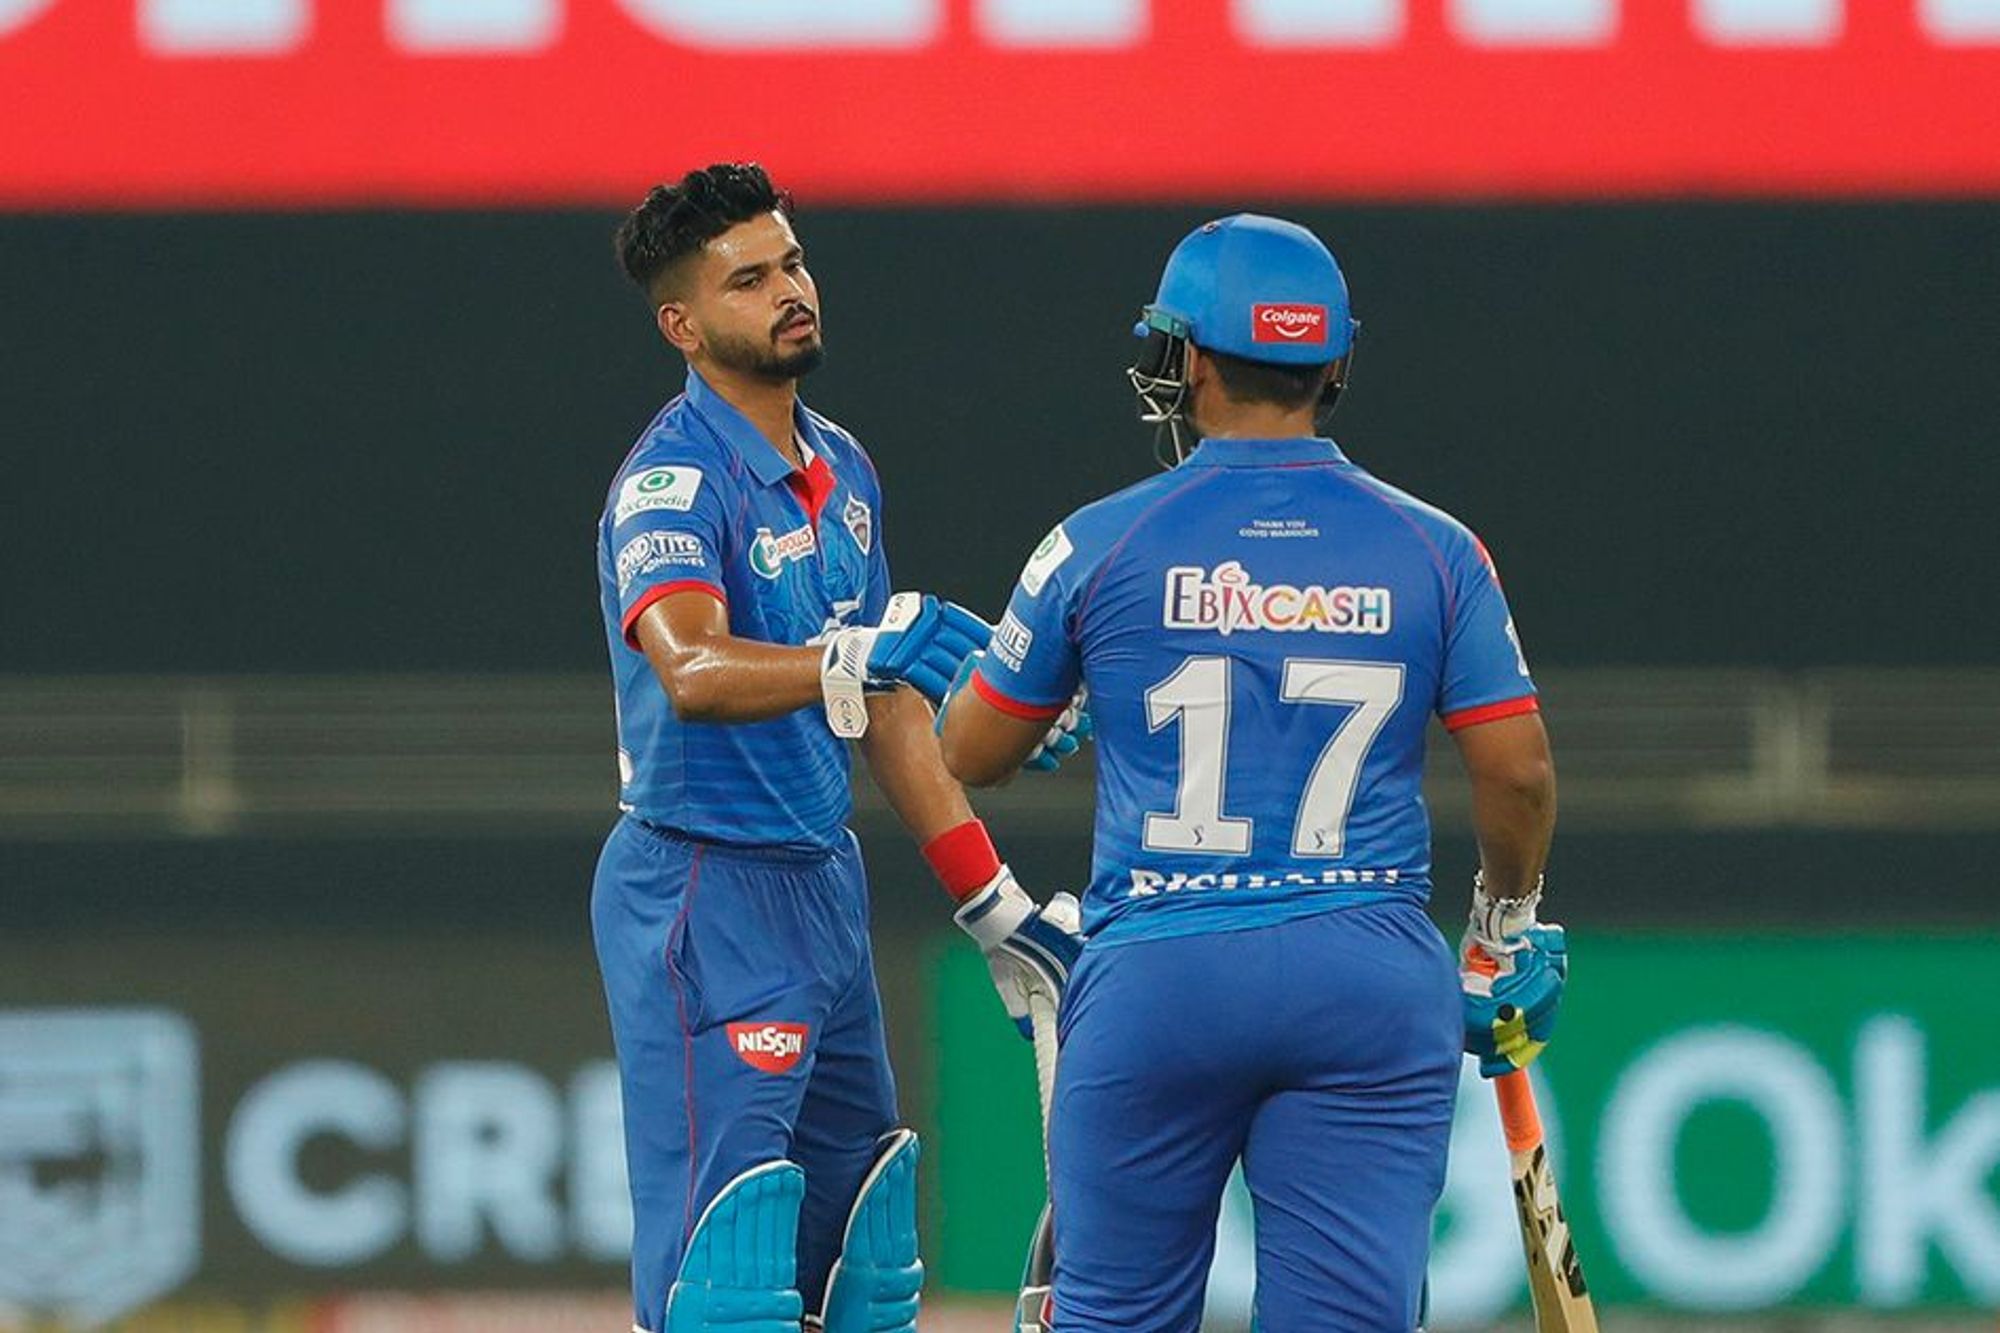 IPL 2021 | Delhi Capitals vs Rajasthan Royals - BONS preview, head to head, where to watch, and betting tips